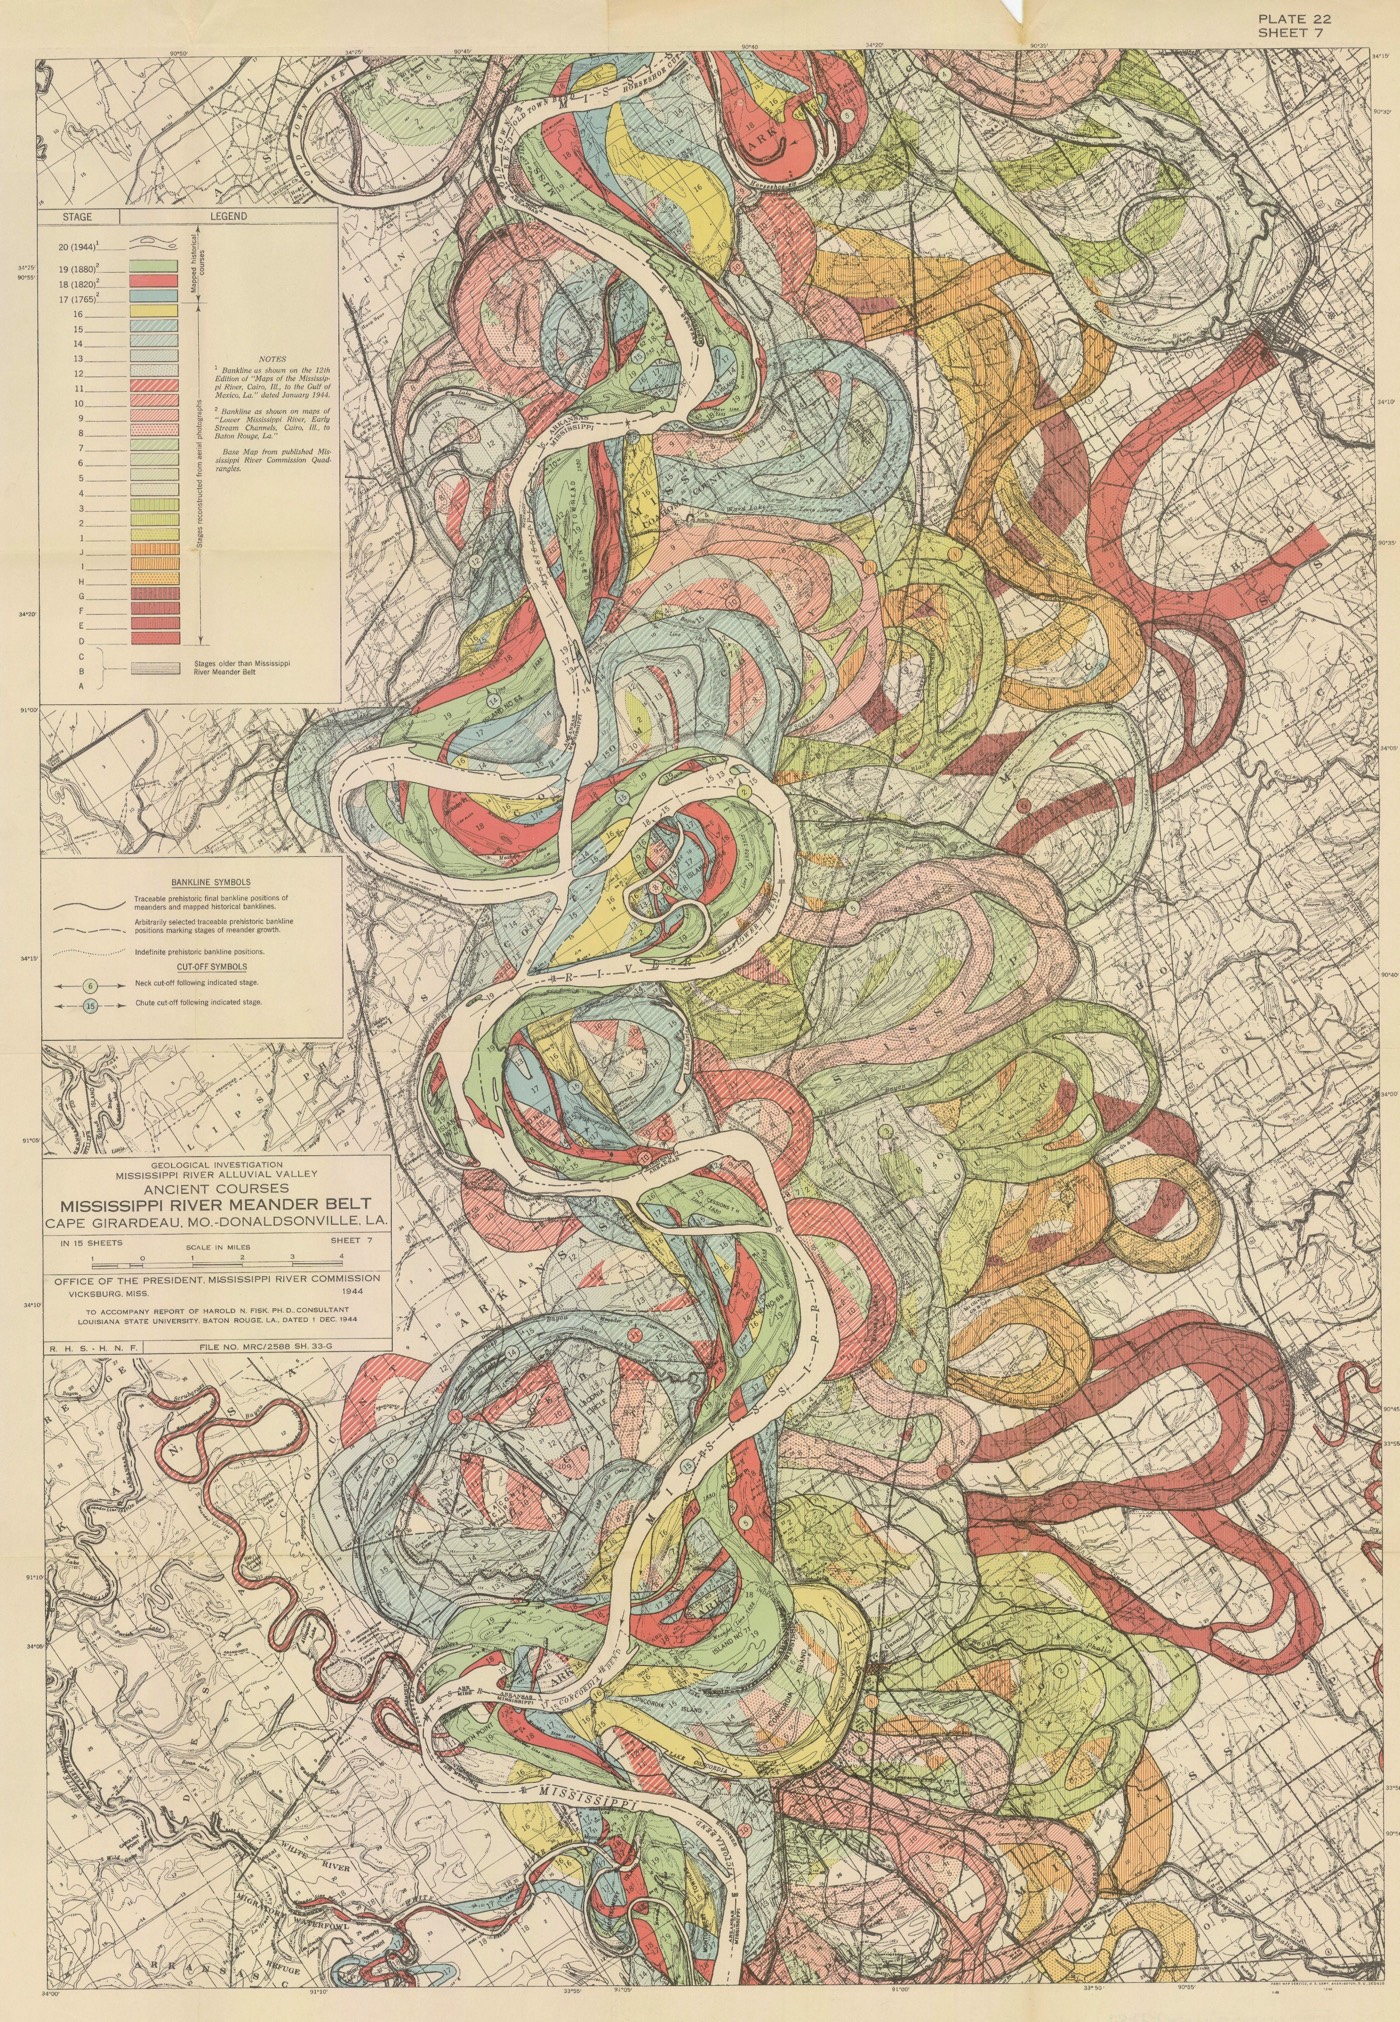 An intricate map of the Mississipi River, with layers and layers of the river superimposed in different pastel colours.